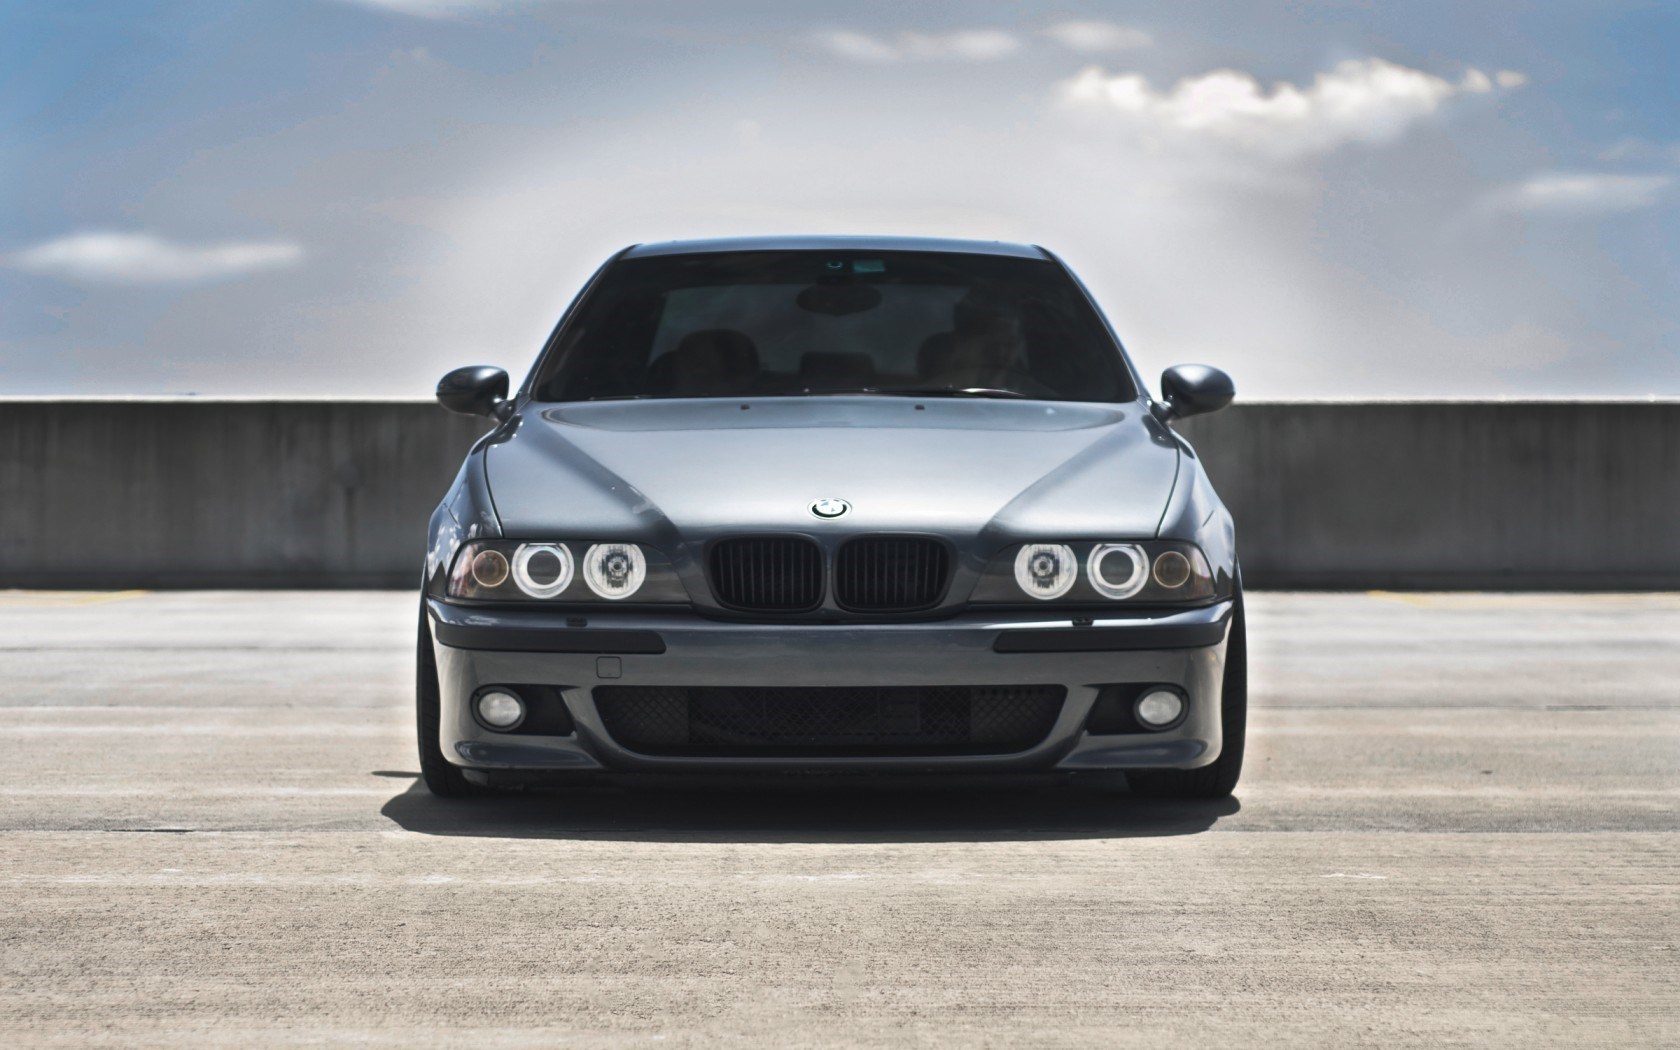 What to Look for When Buying a BMW E39 M5? - autoevolution